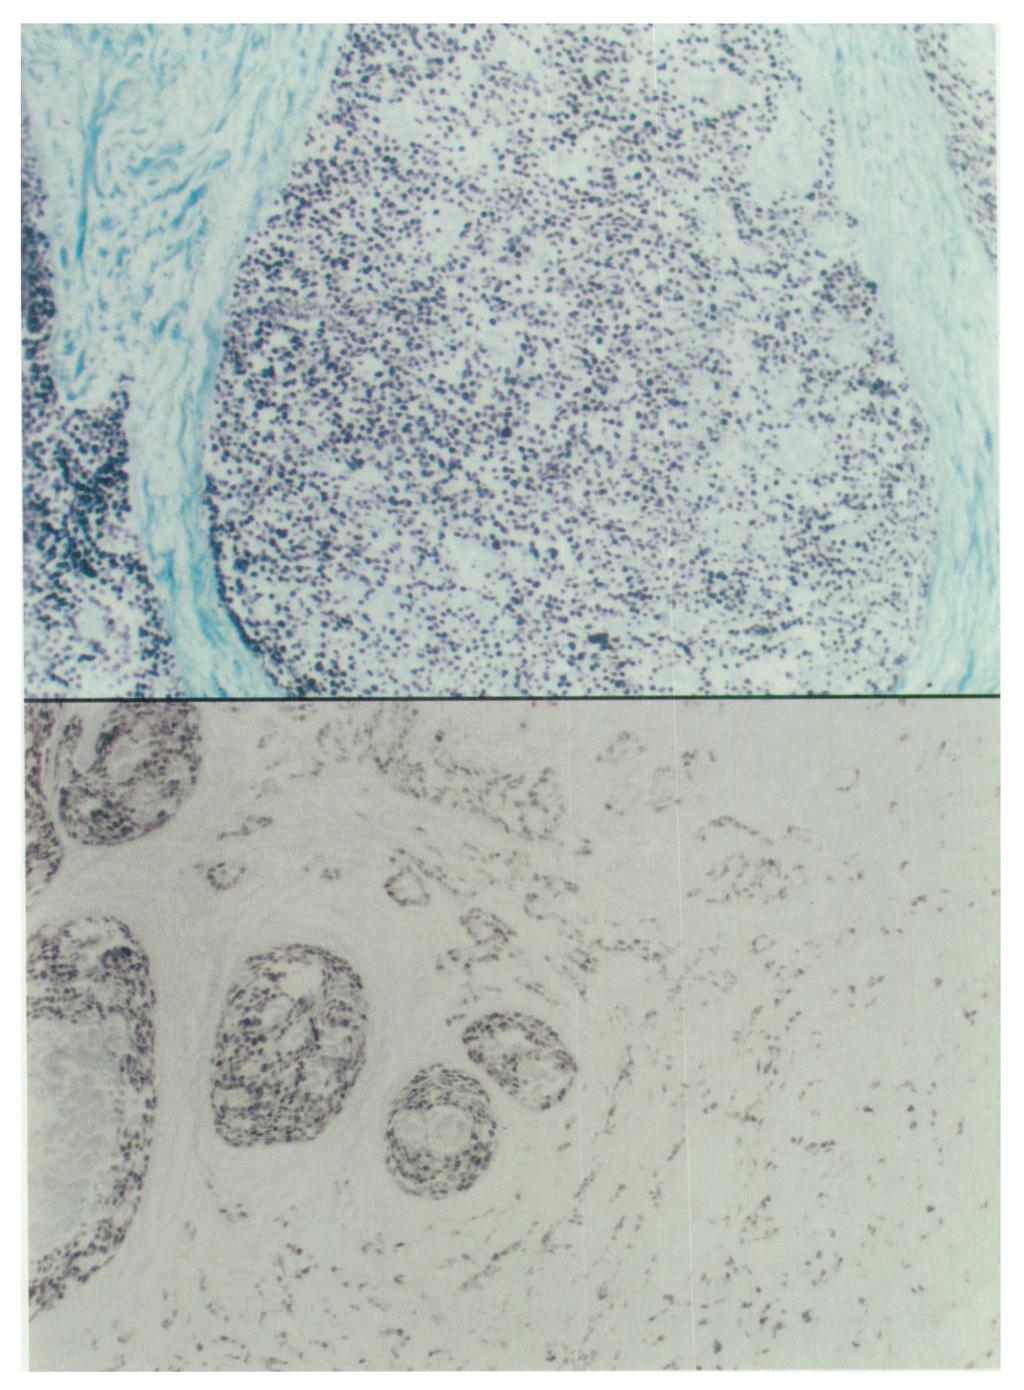 Most invasive carcinomas displayed the same ER staining pattern and level of intensity as the adjacent CIS component. ICA counterstain with methyl green (X100).